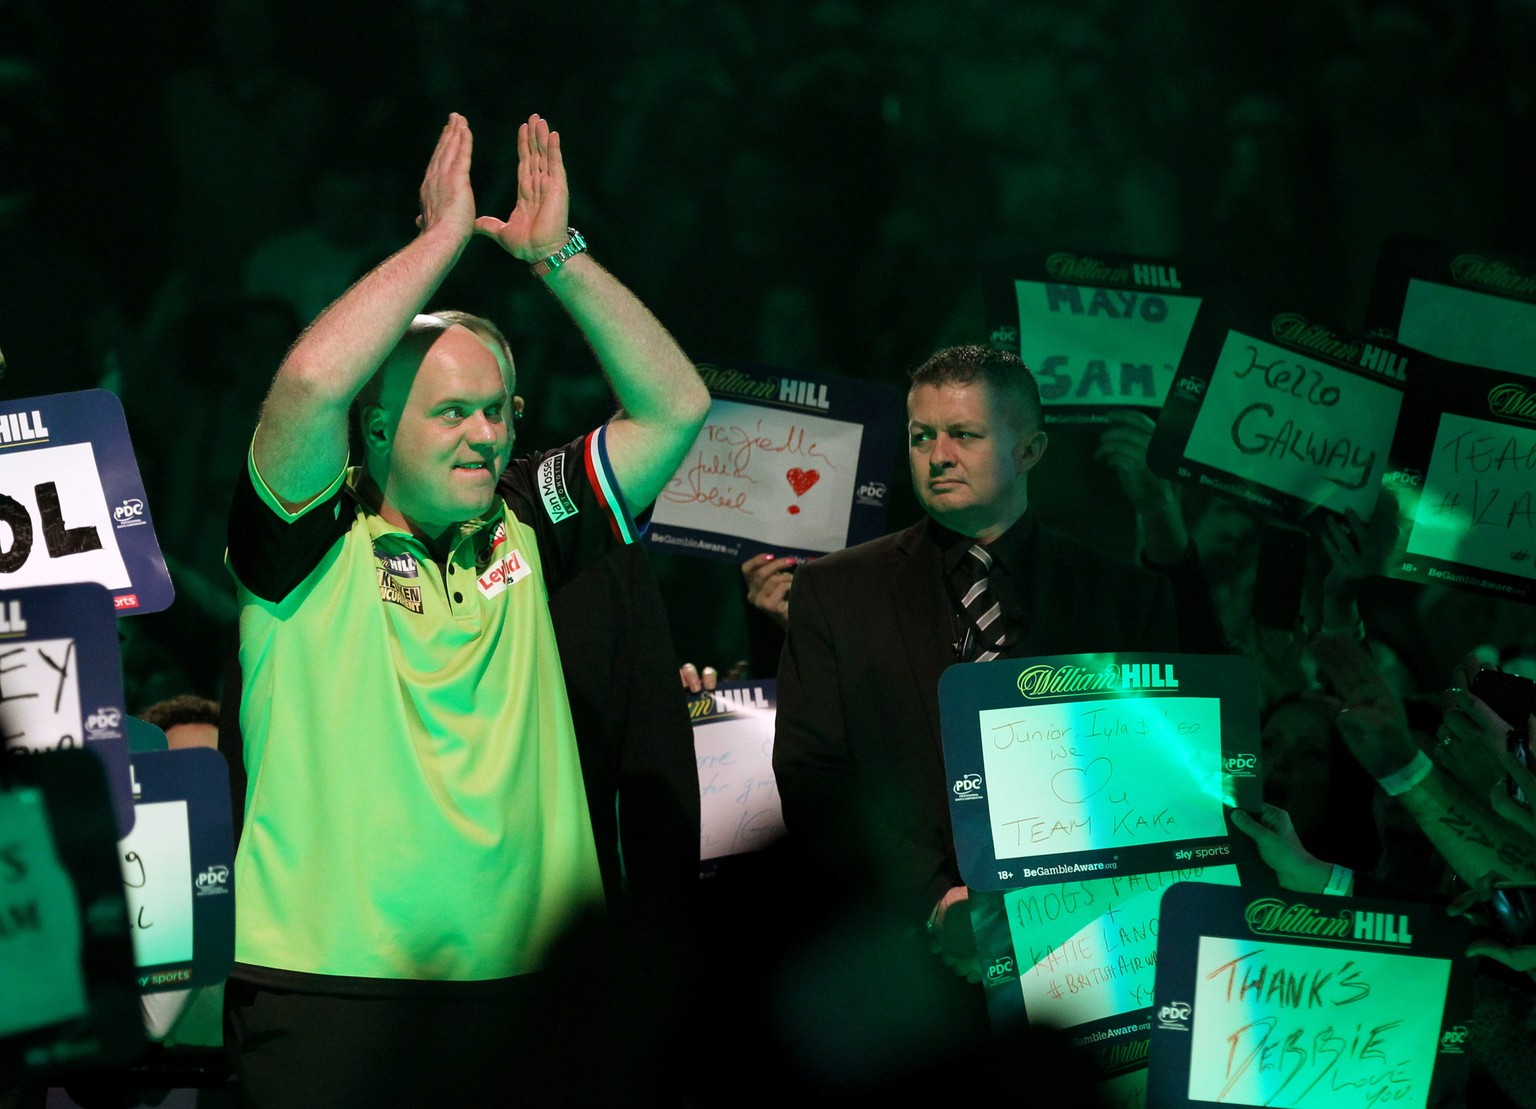 epa07257547 Dutch Michael van Gerwen (L) attends a match against British Michael Smith during the PDC World Championship final match at the Alexander Palace in North London, Britain, 01 January 2019.  ...